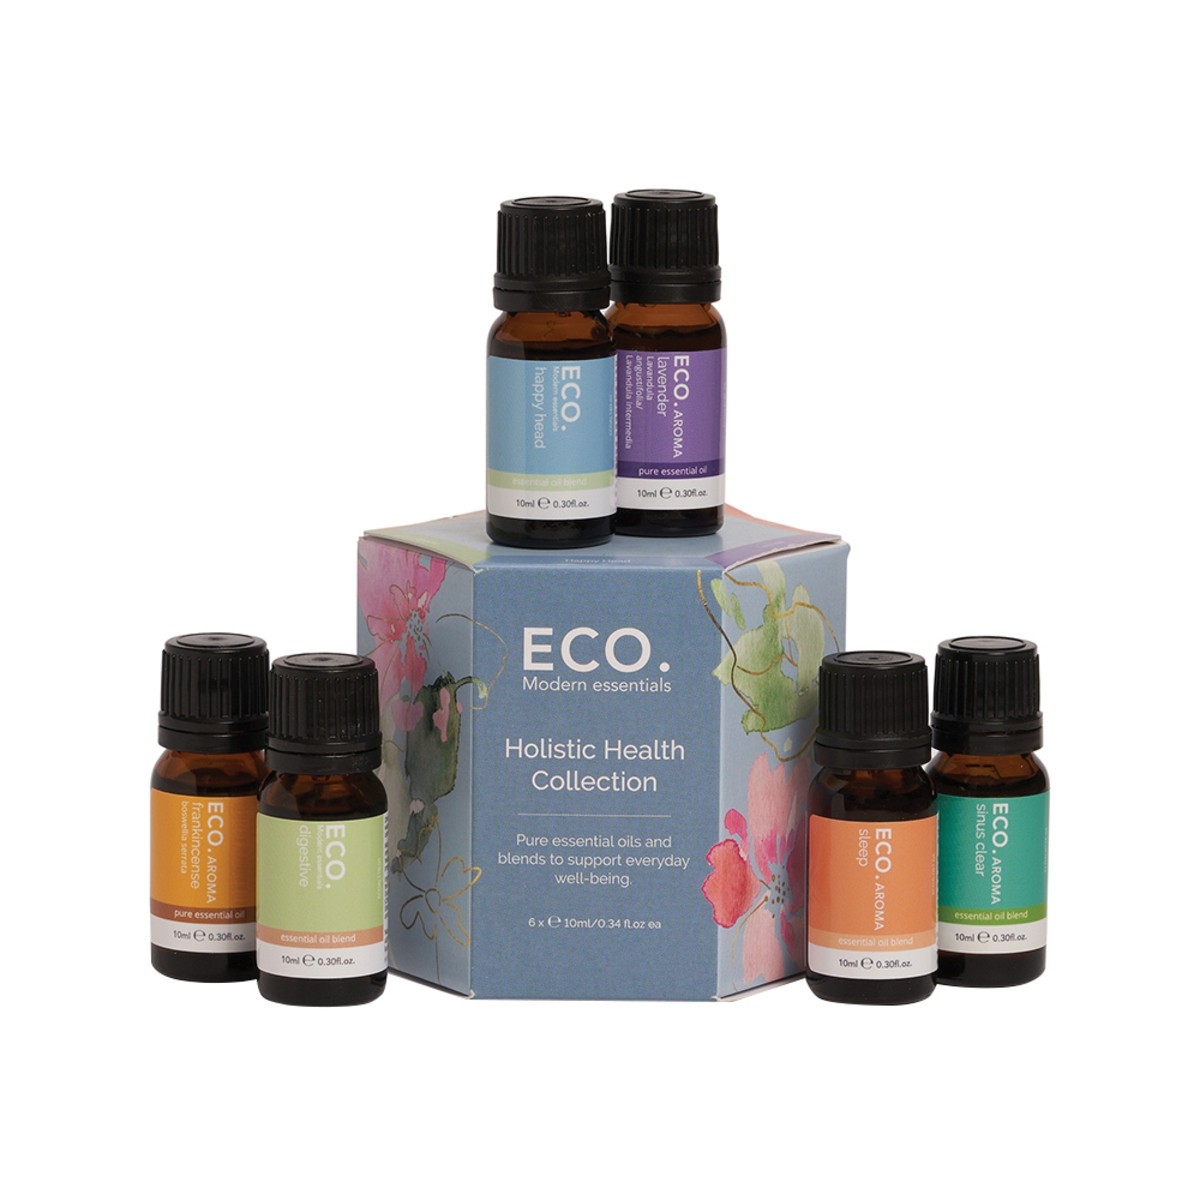 Eco Modern Essentials Aroma Essential Oil Blend Collection Holistic Health 10ml x 6 Pack